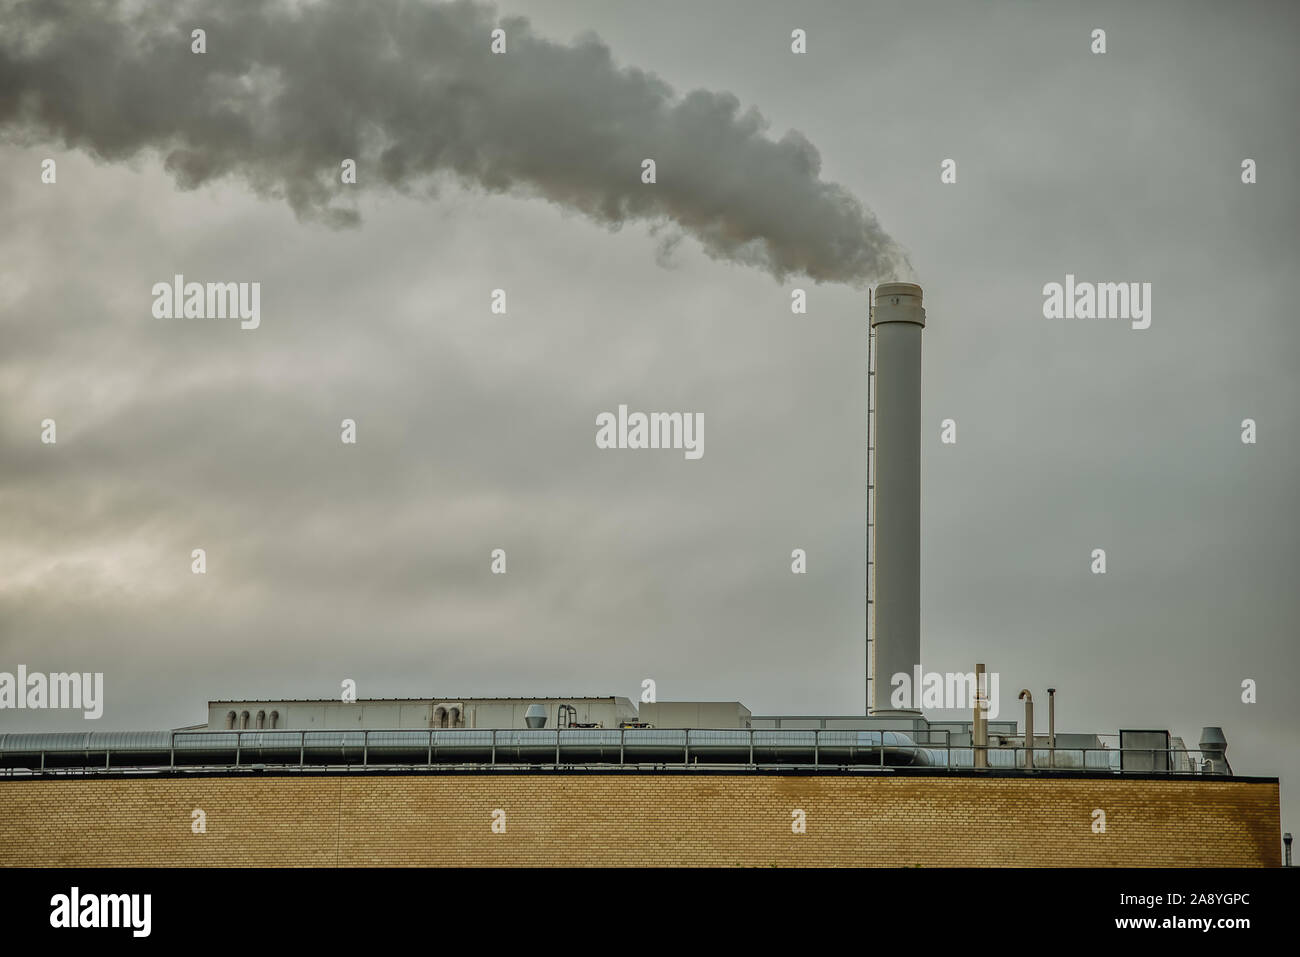 Black smoke on a grey sky, comming from a tall chimney on the top of a factory. Denmark, November 10, 2019 Stock Photo